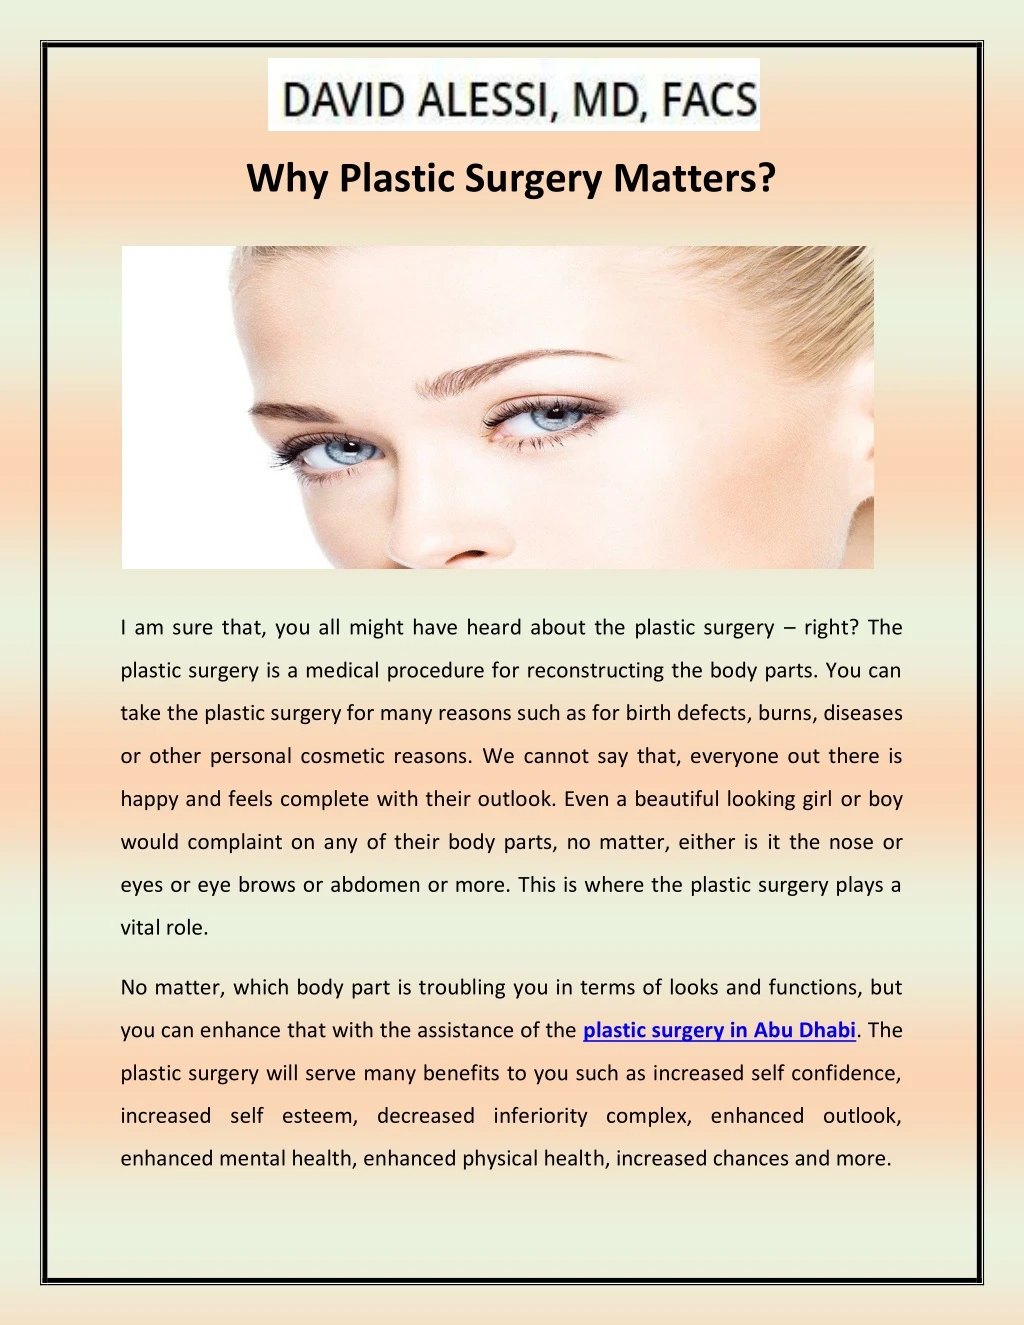 why plastic surgery matters